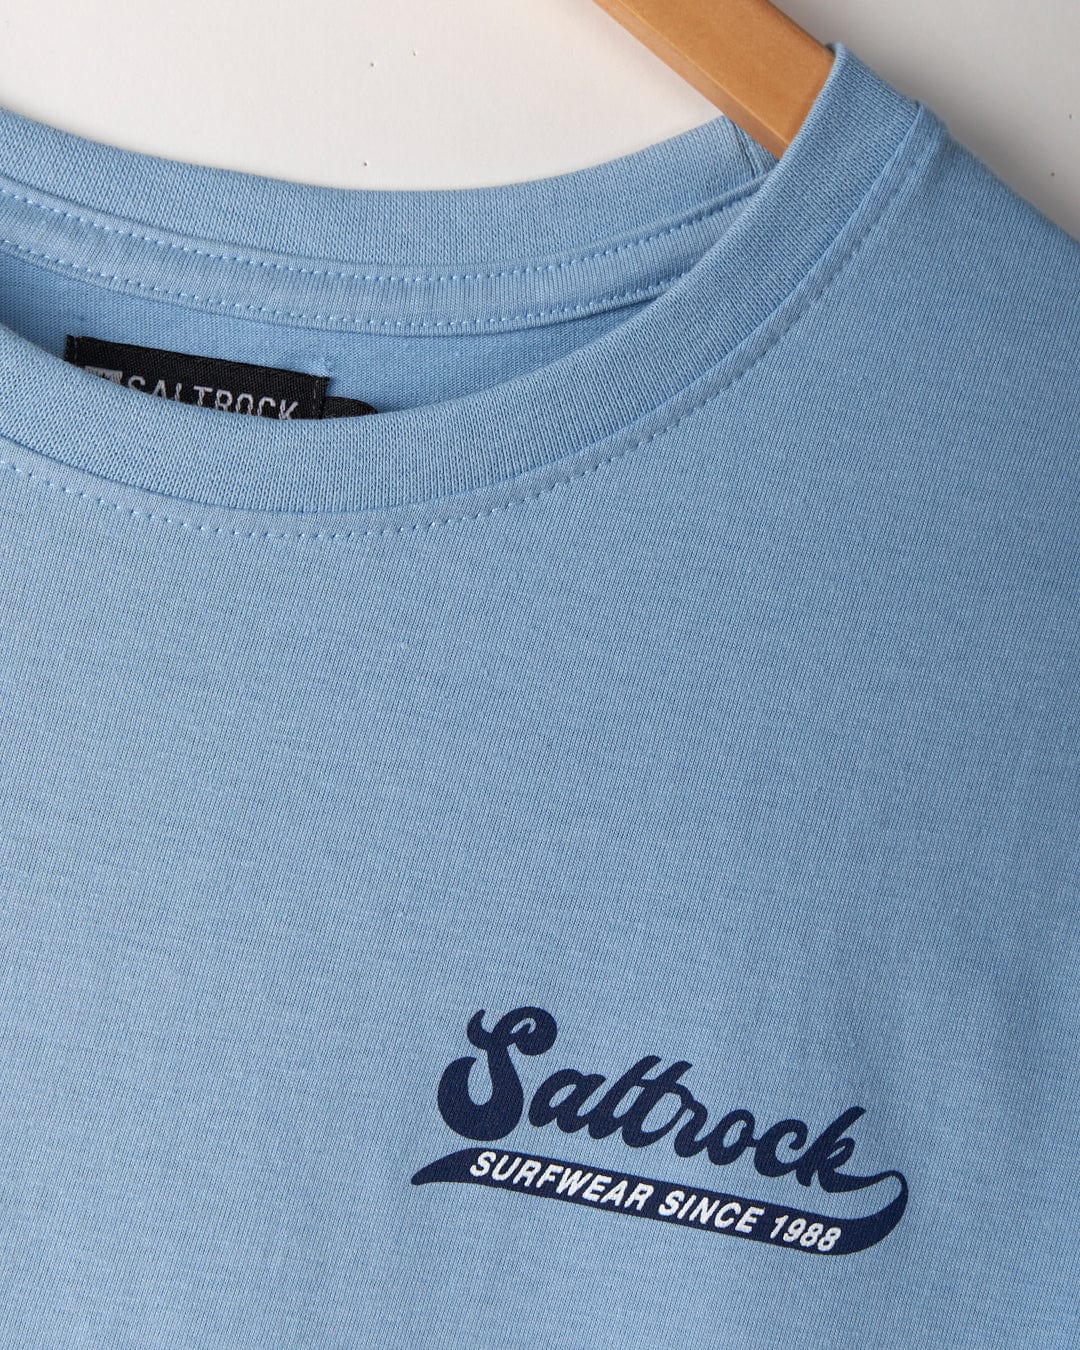 Close-up of a light blue Home Run - Mens T-Shirt - Blue on a hanger, crafted from 100% cotton with the brand's logo and the text "Saltrock Surfwear Since 1988" in dark blue on the chest.